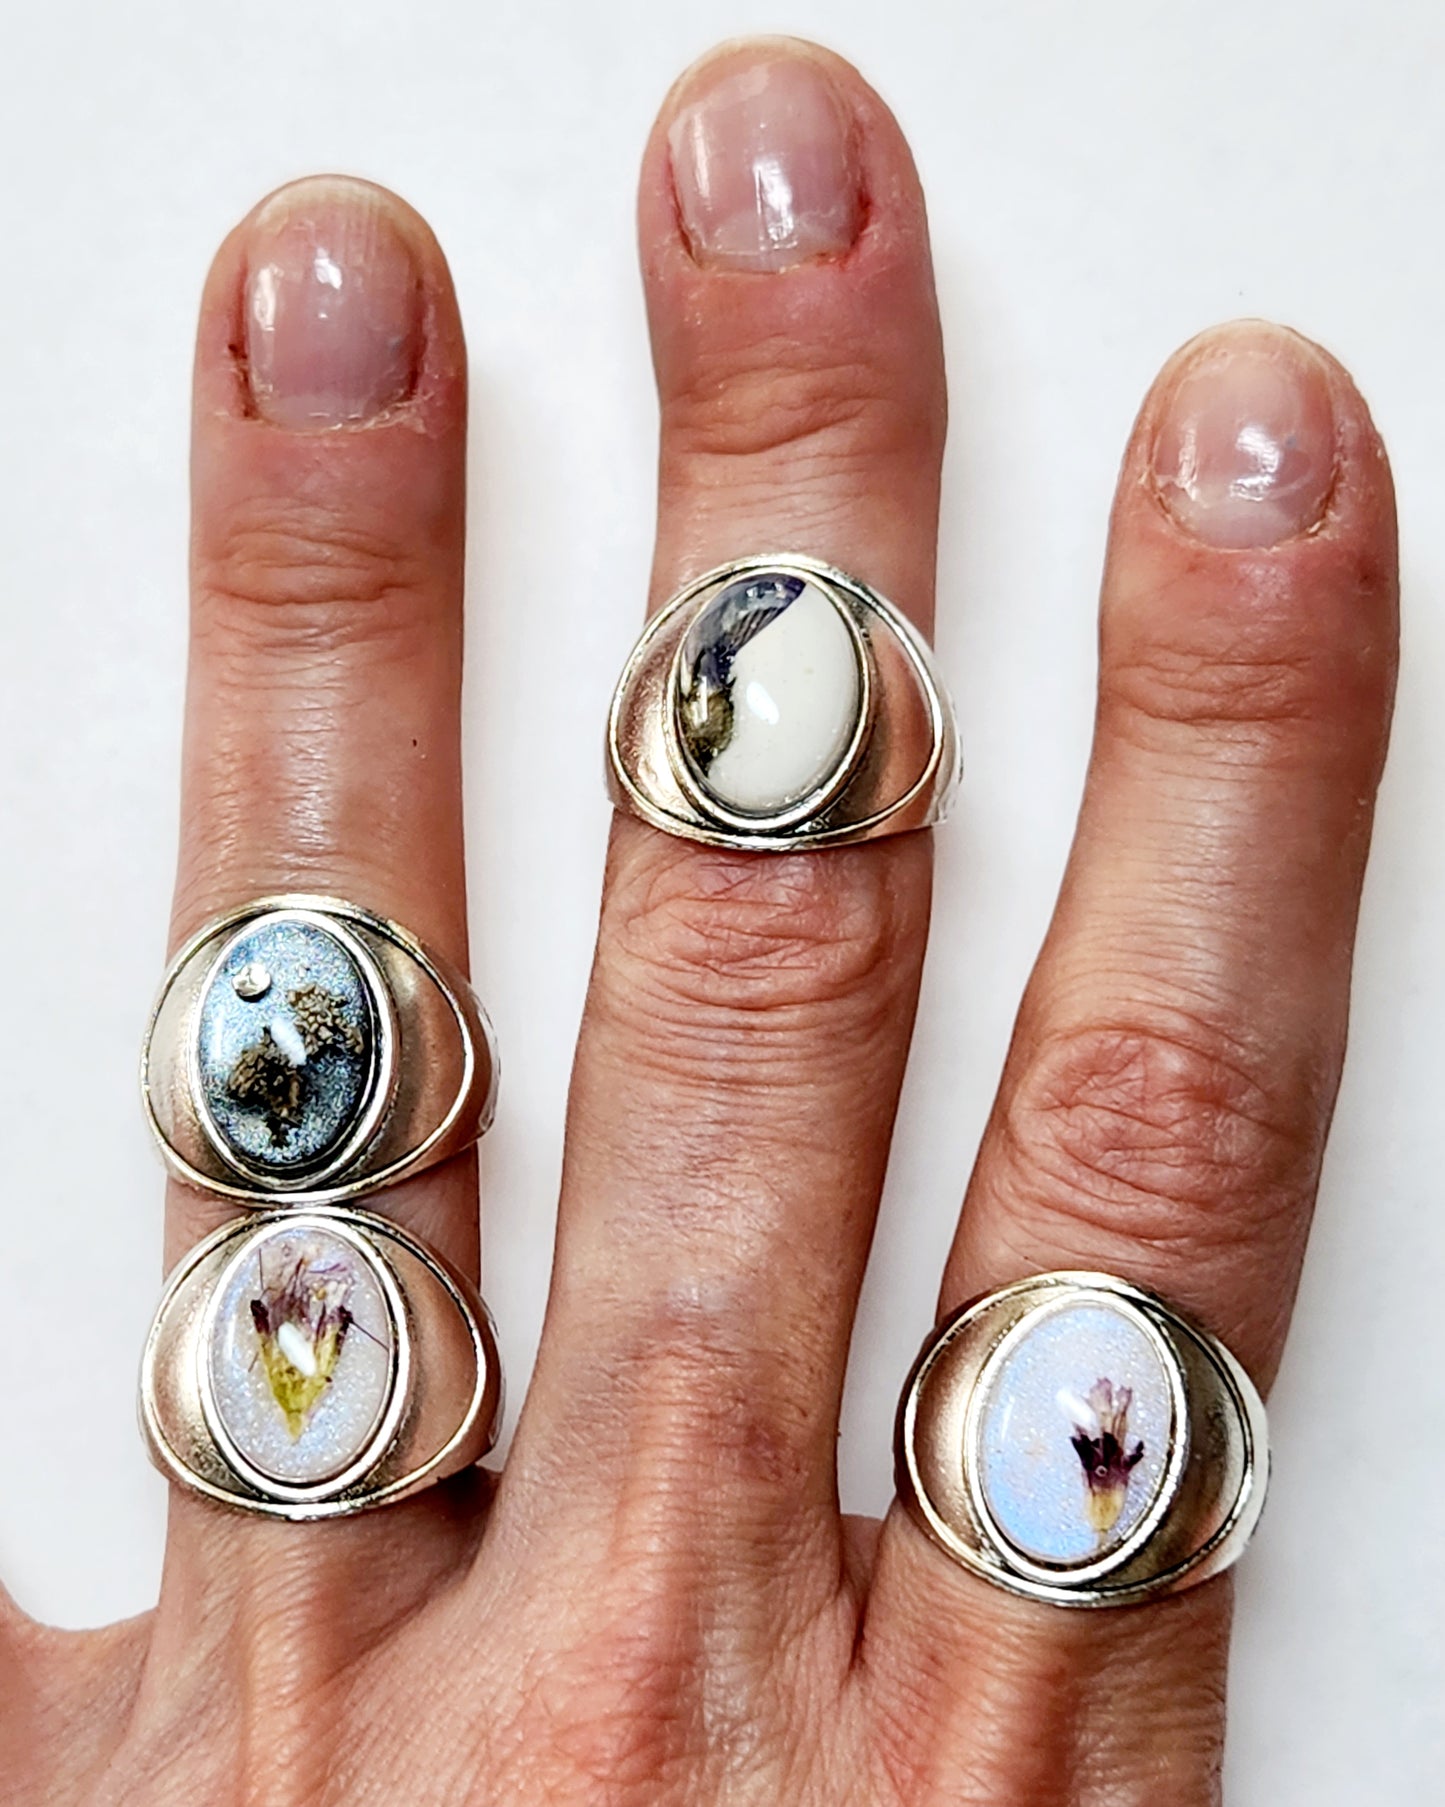 Rings size 8 - Tundra gems